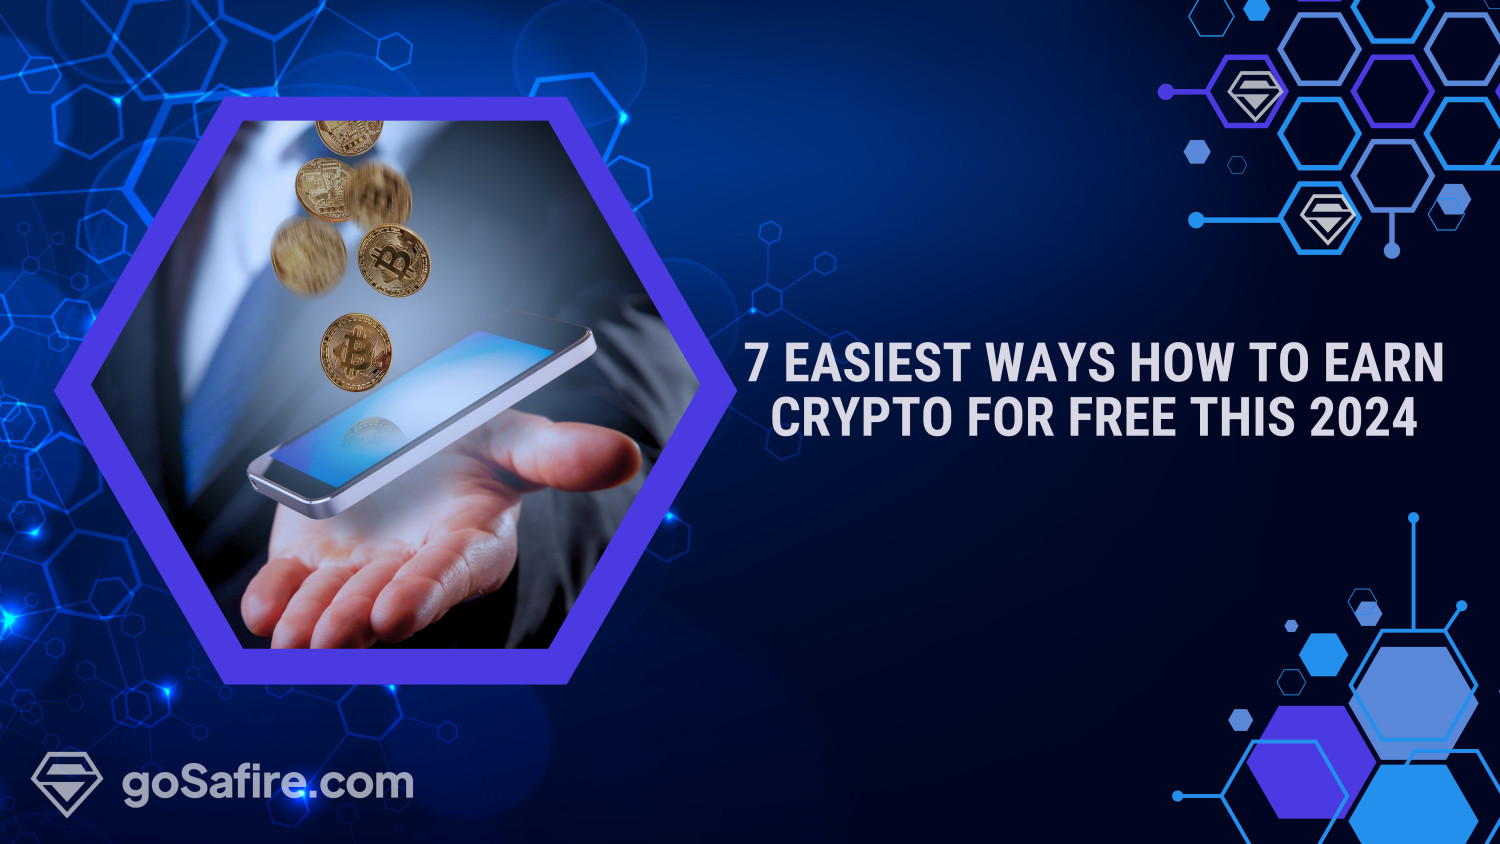 7 Easiest Ways How to Earn Crypto for Free this 2024